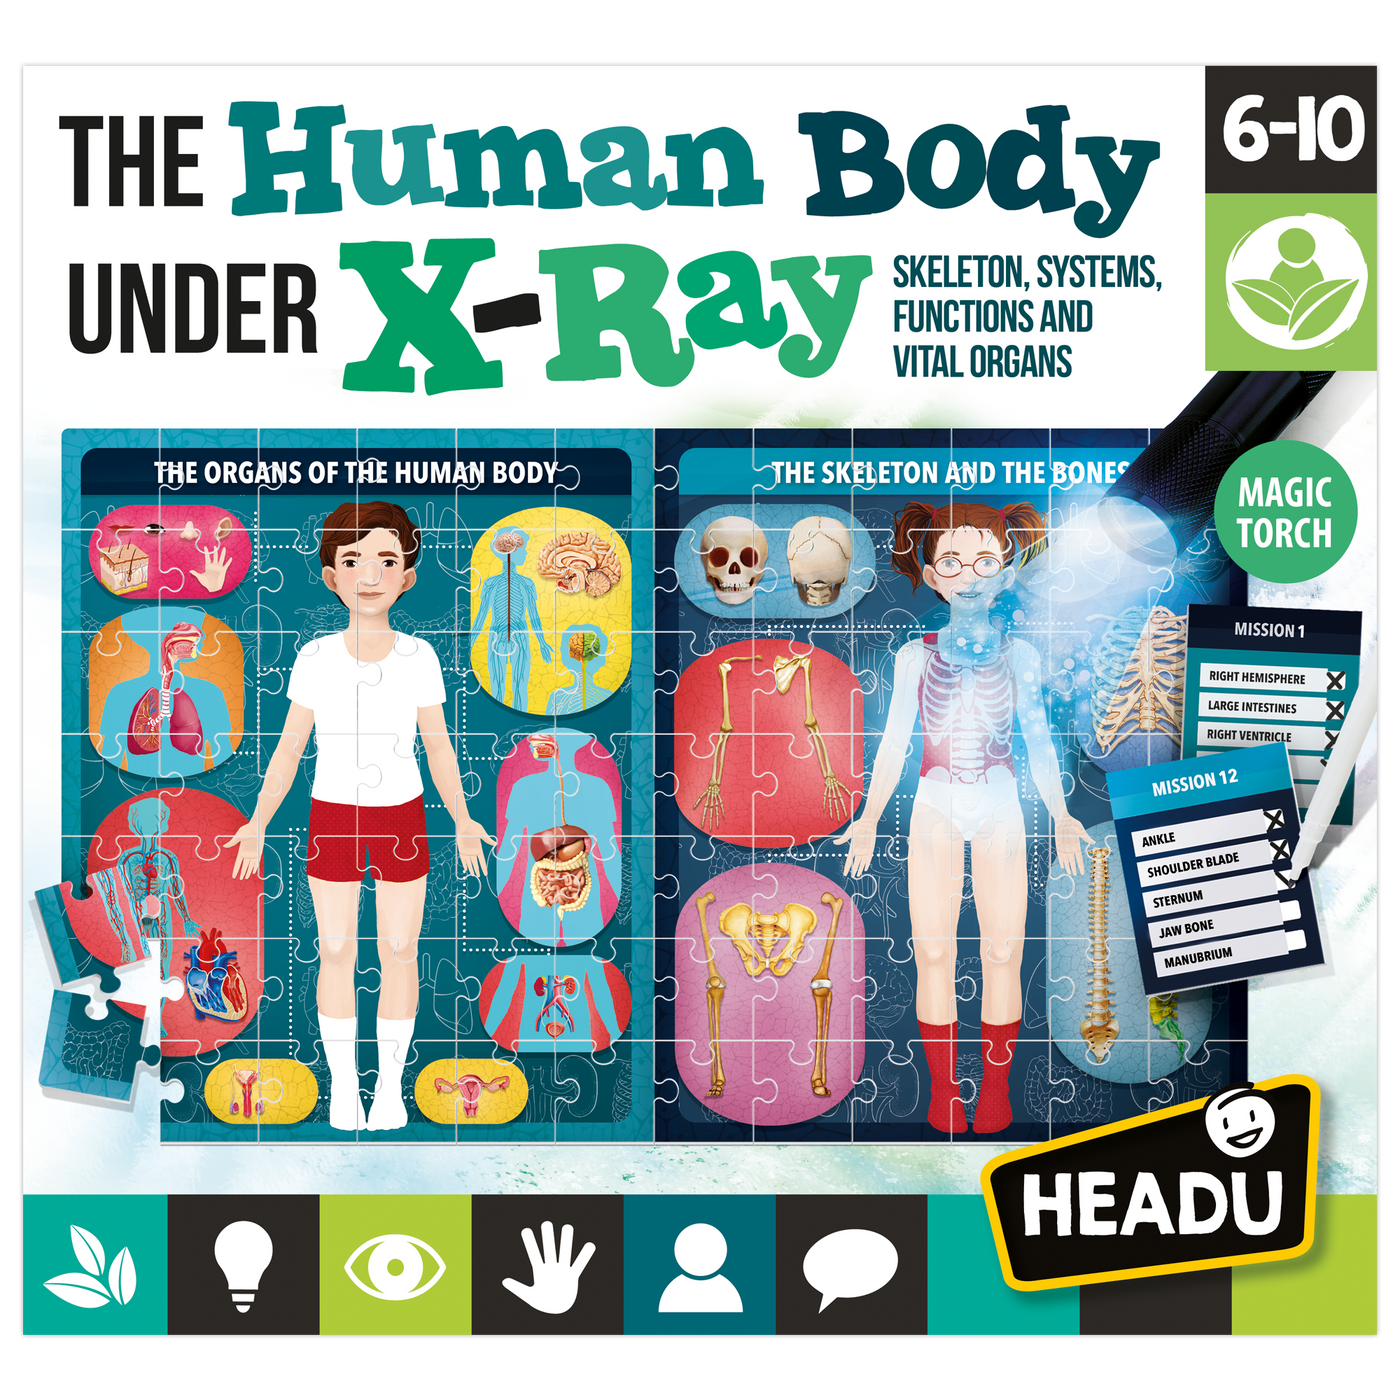 The Human Body under X-Ray